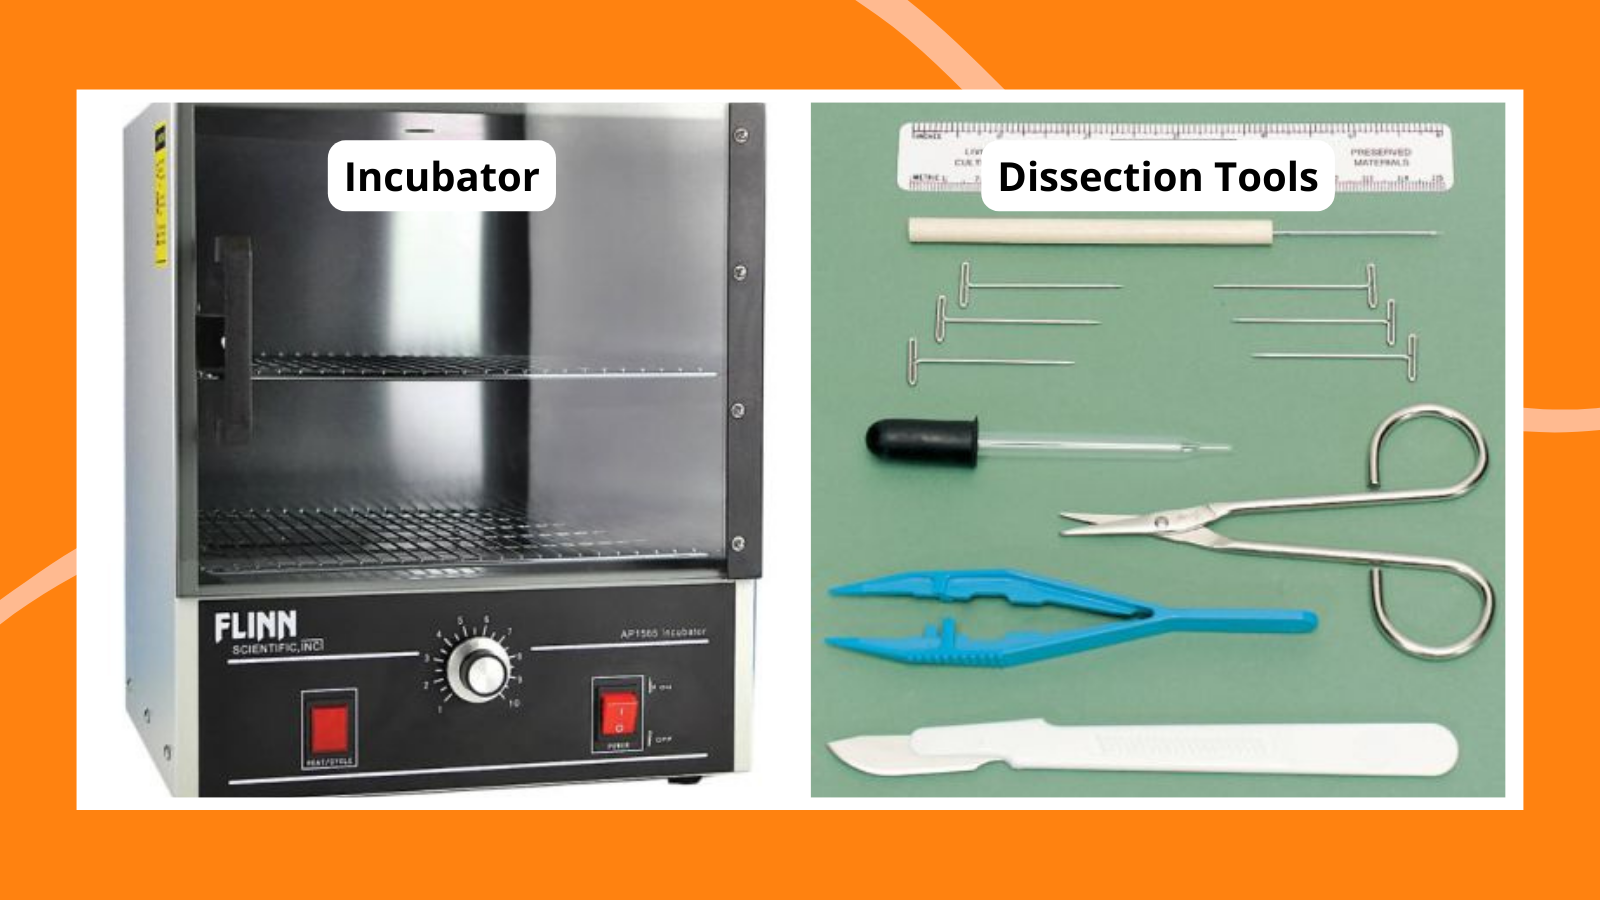 Collage of school biology lab equipment, including an incubator and dissection tools